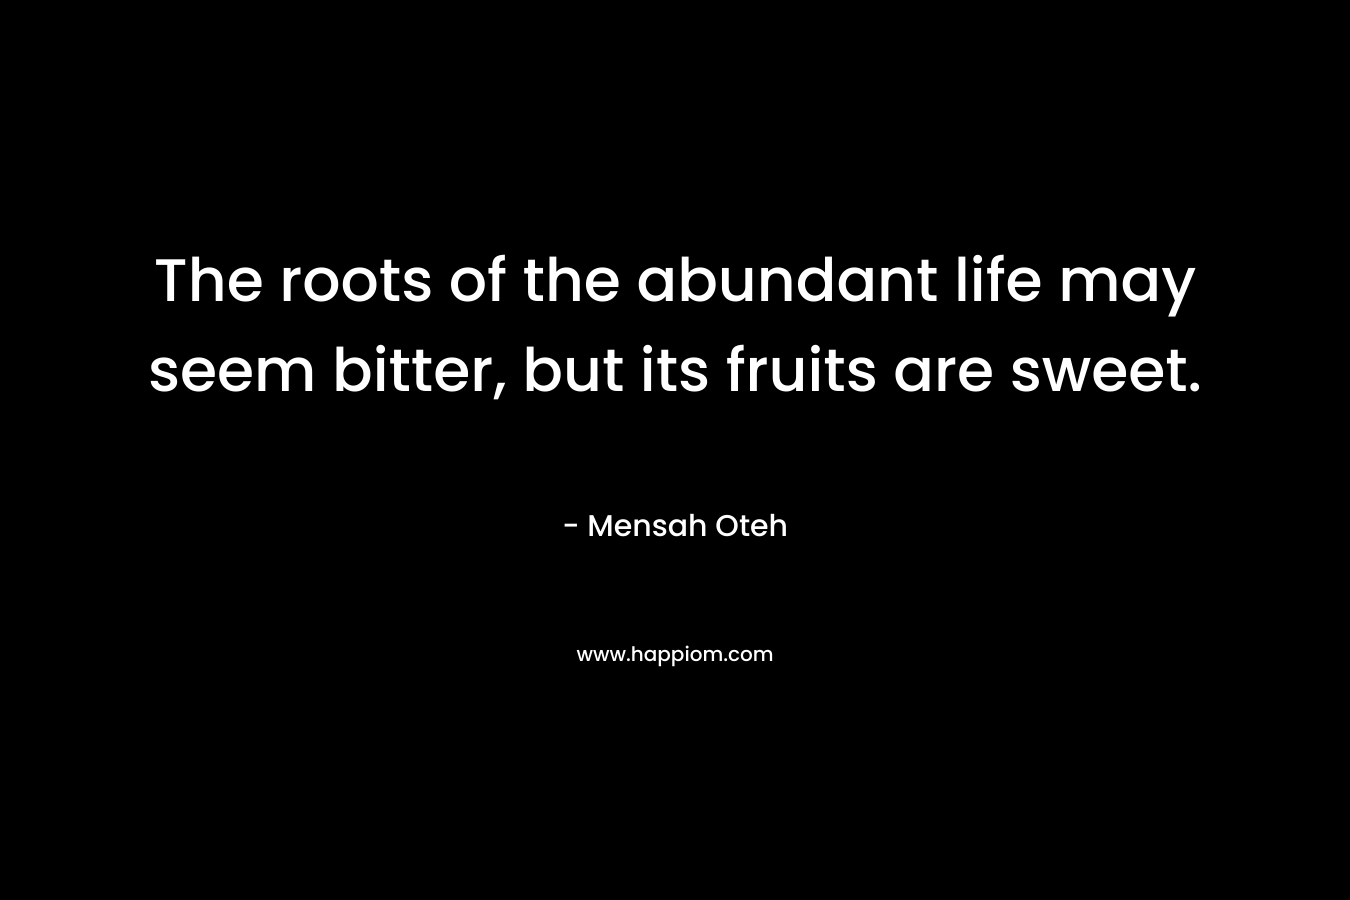 The roots of the abundant life may seem bitter, but its fruits are sweet.